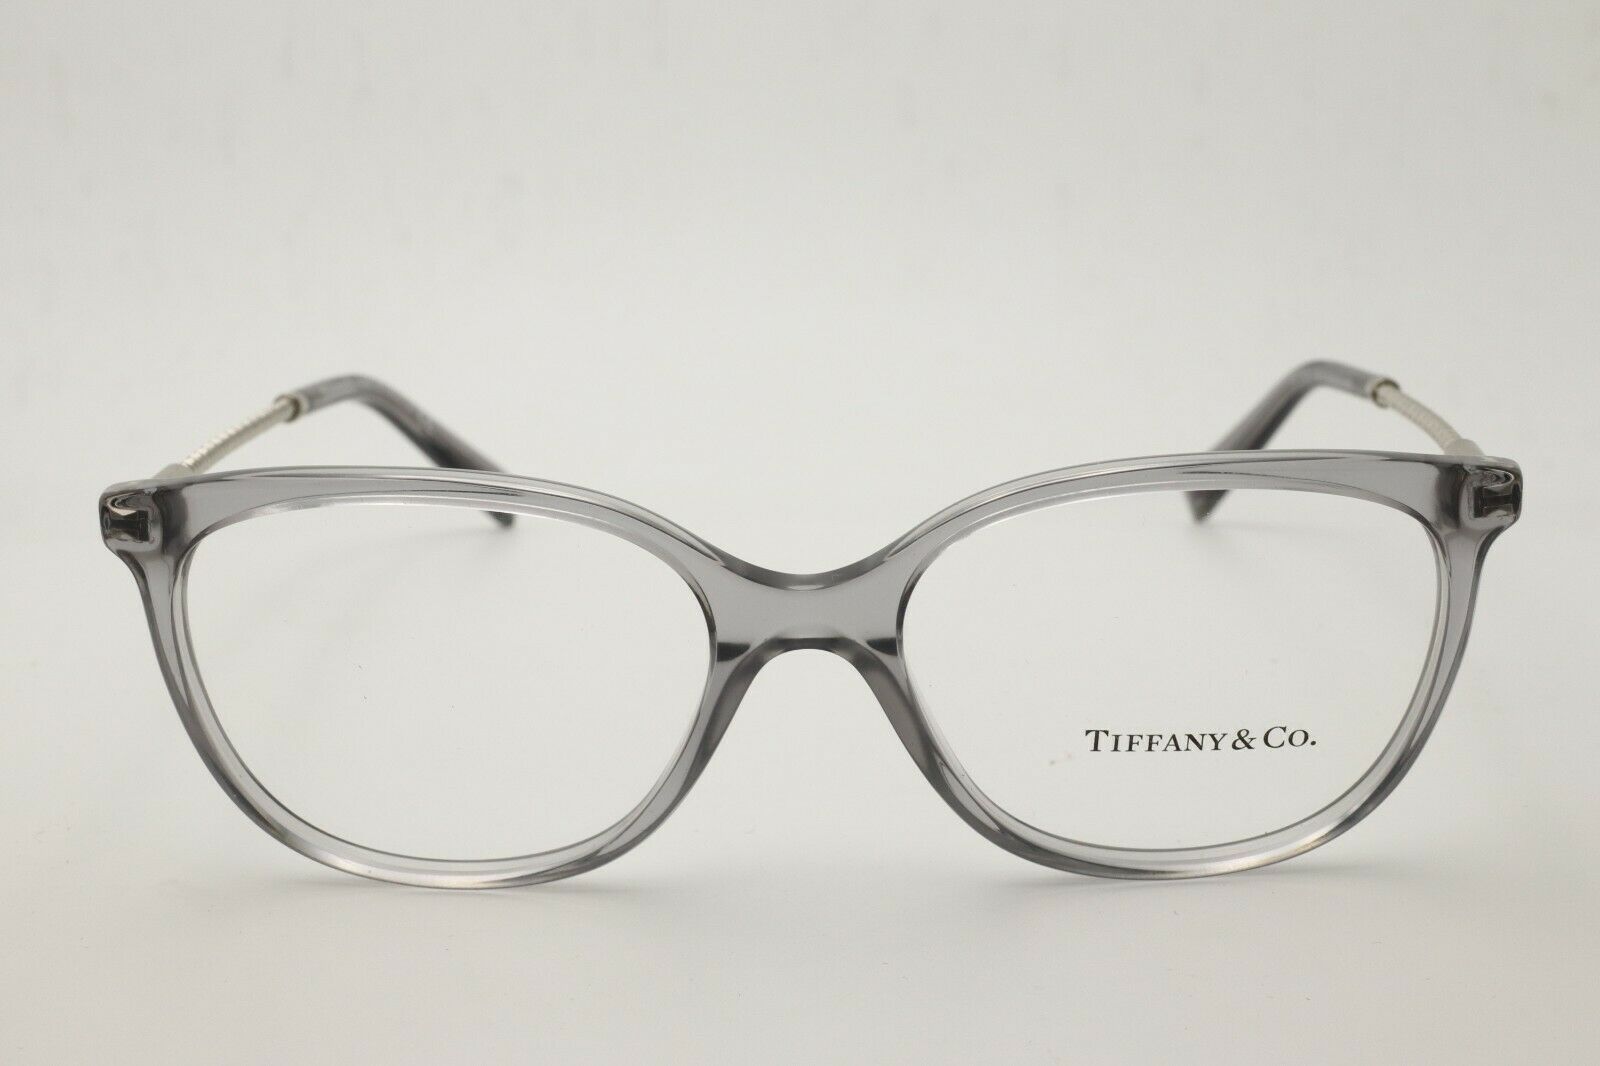 New Authentic Tiffany And Co Women Eyeglasses Tf 2168 5270 Crystal Gray